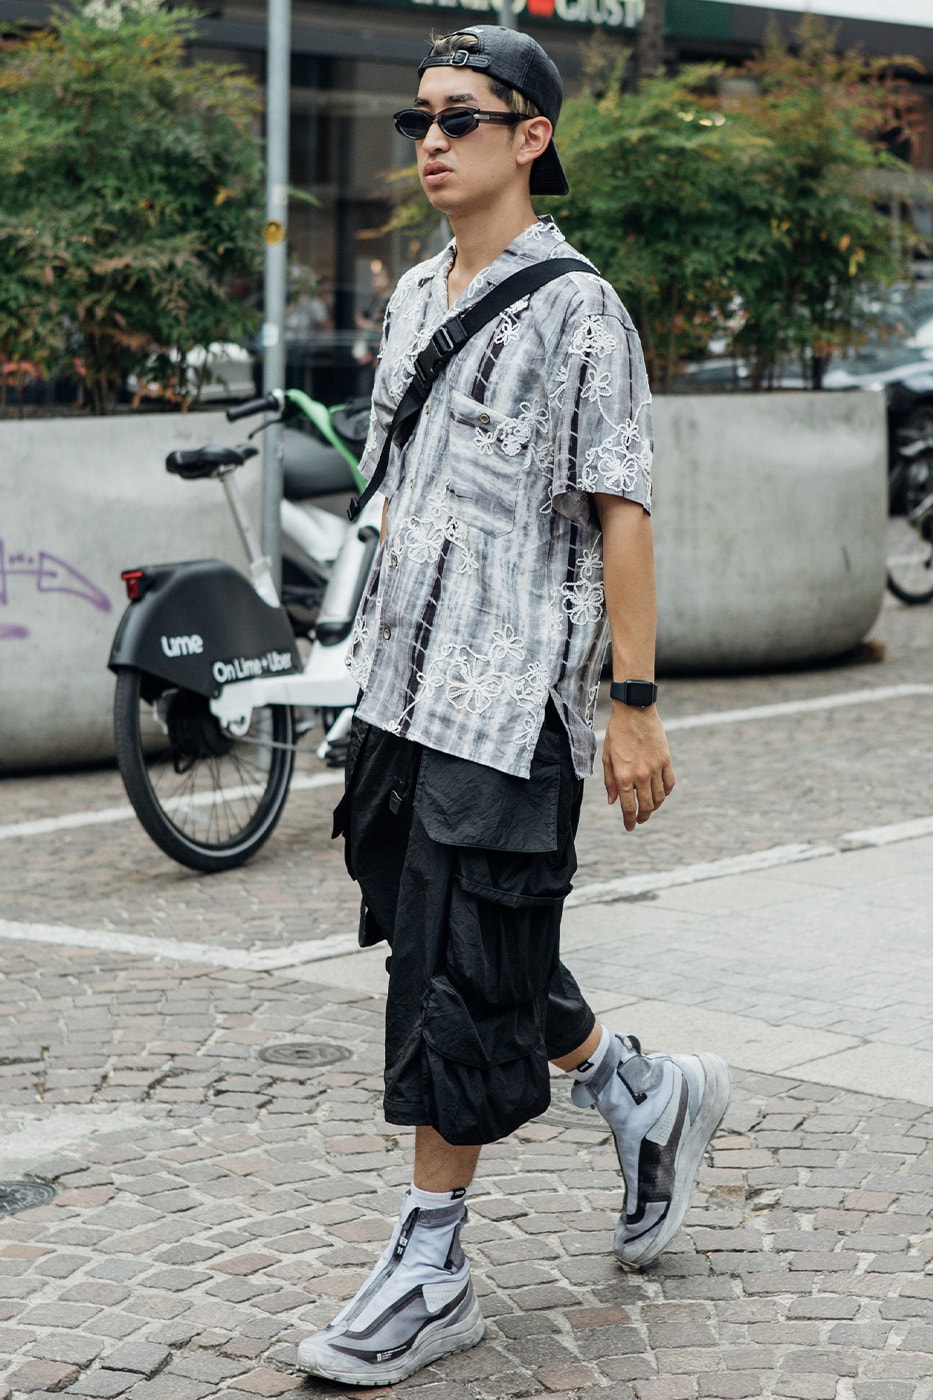 Outfit  Street style outfits men, Streetwear men outfits, Pants outfit men